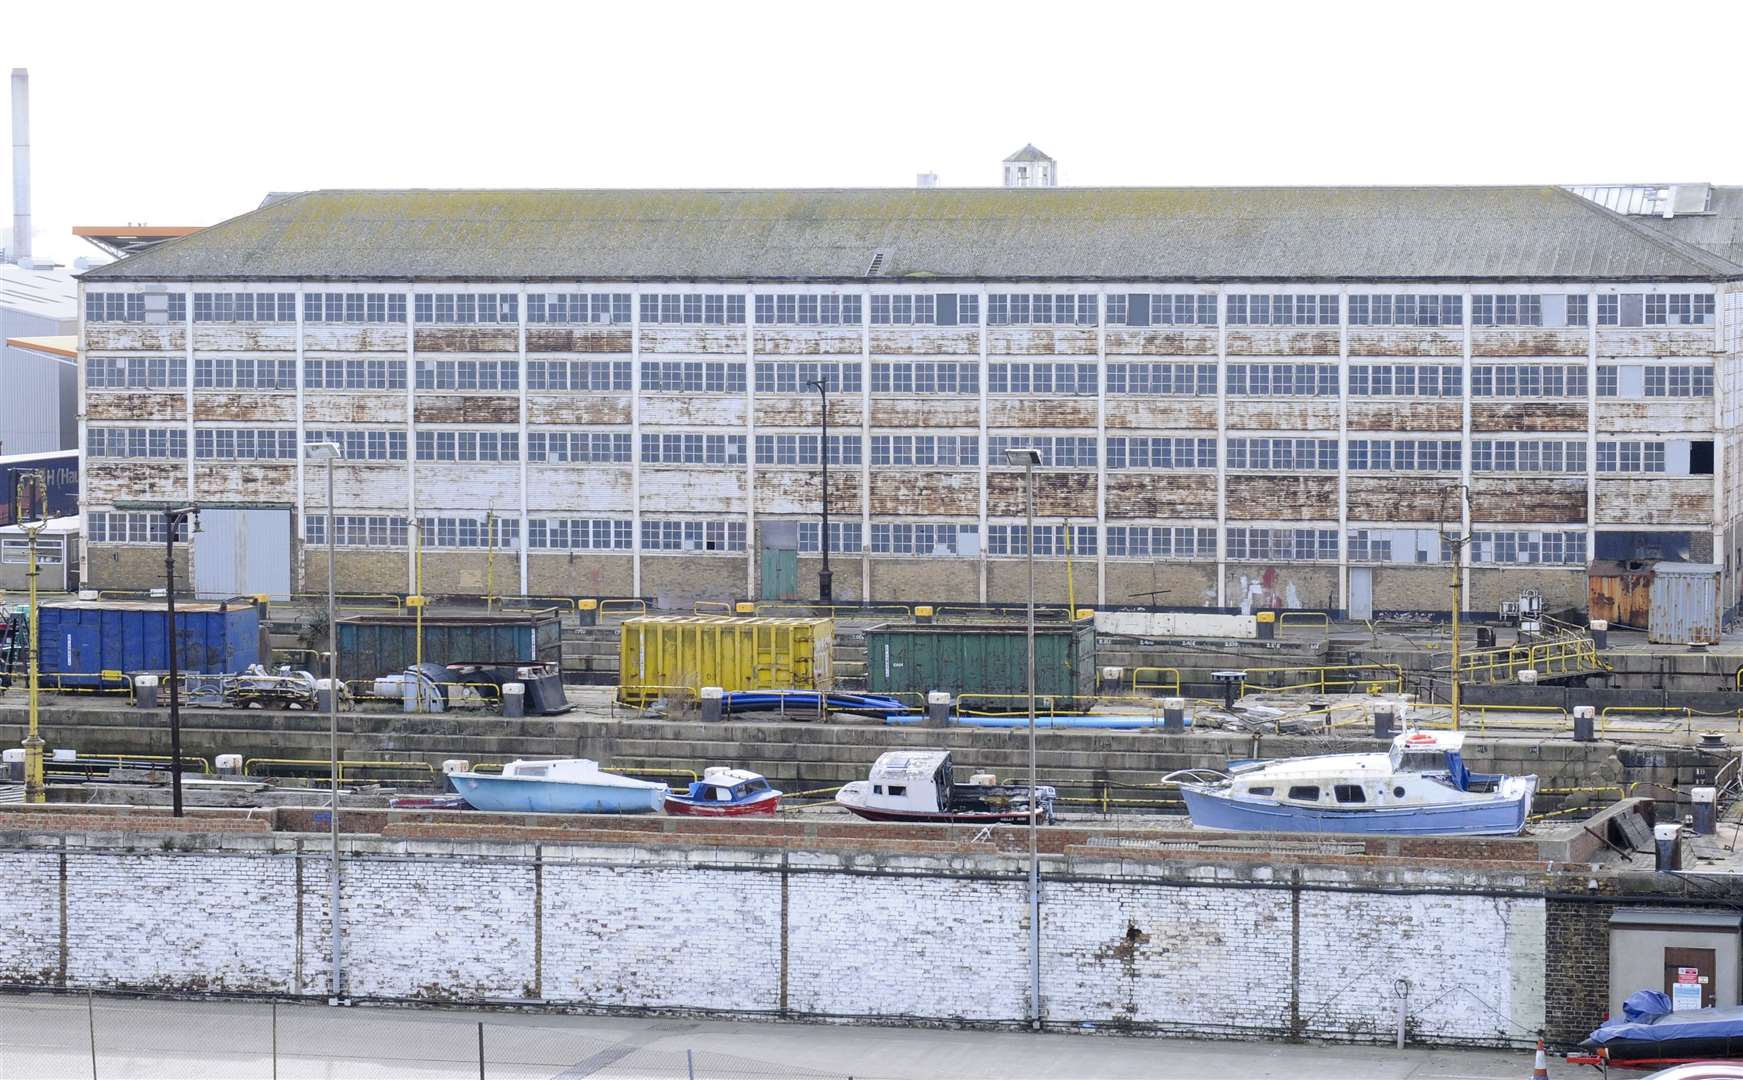 The Boat Store, one of the old HM Dockyard buildings at Sheerness and the first multi-storey building in the world with an all-metal frame, has been on the 'At Risk' register for more than 20 years